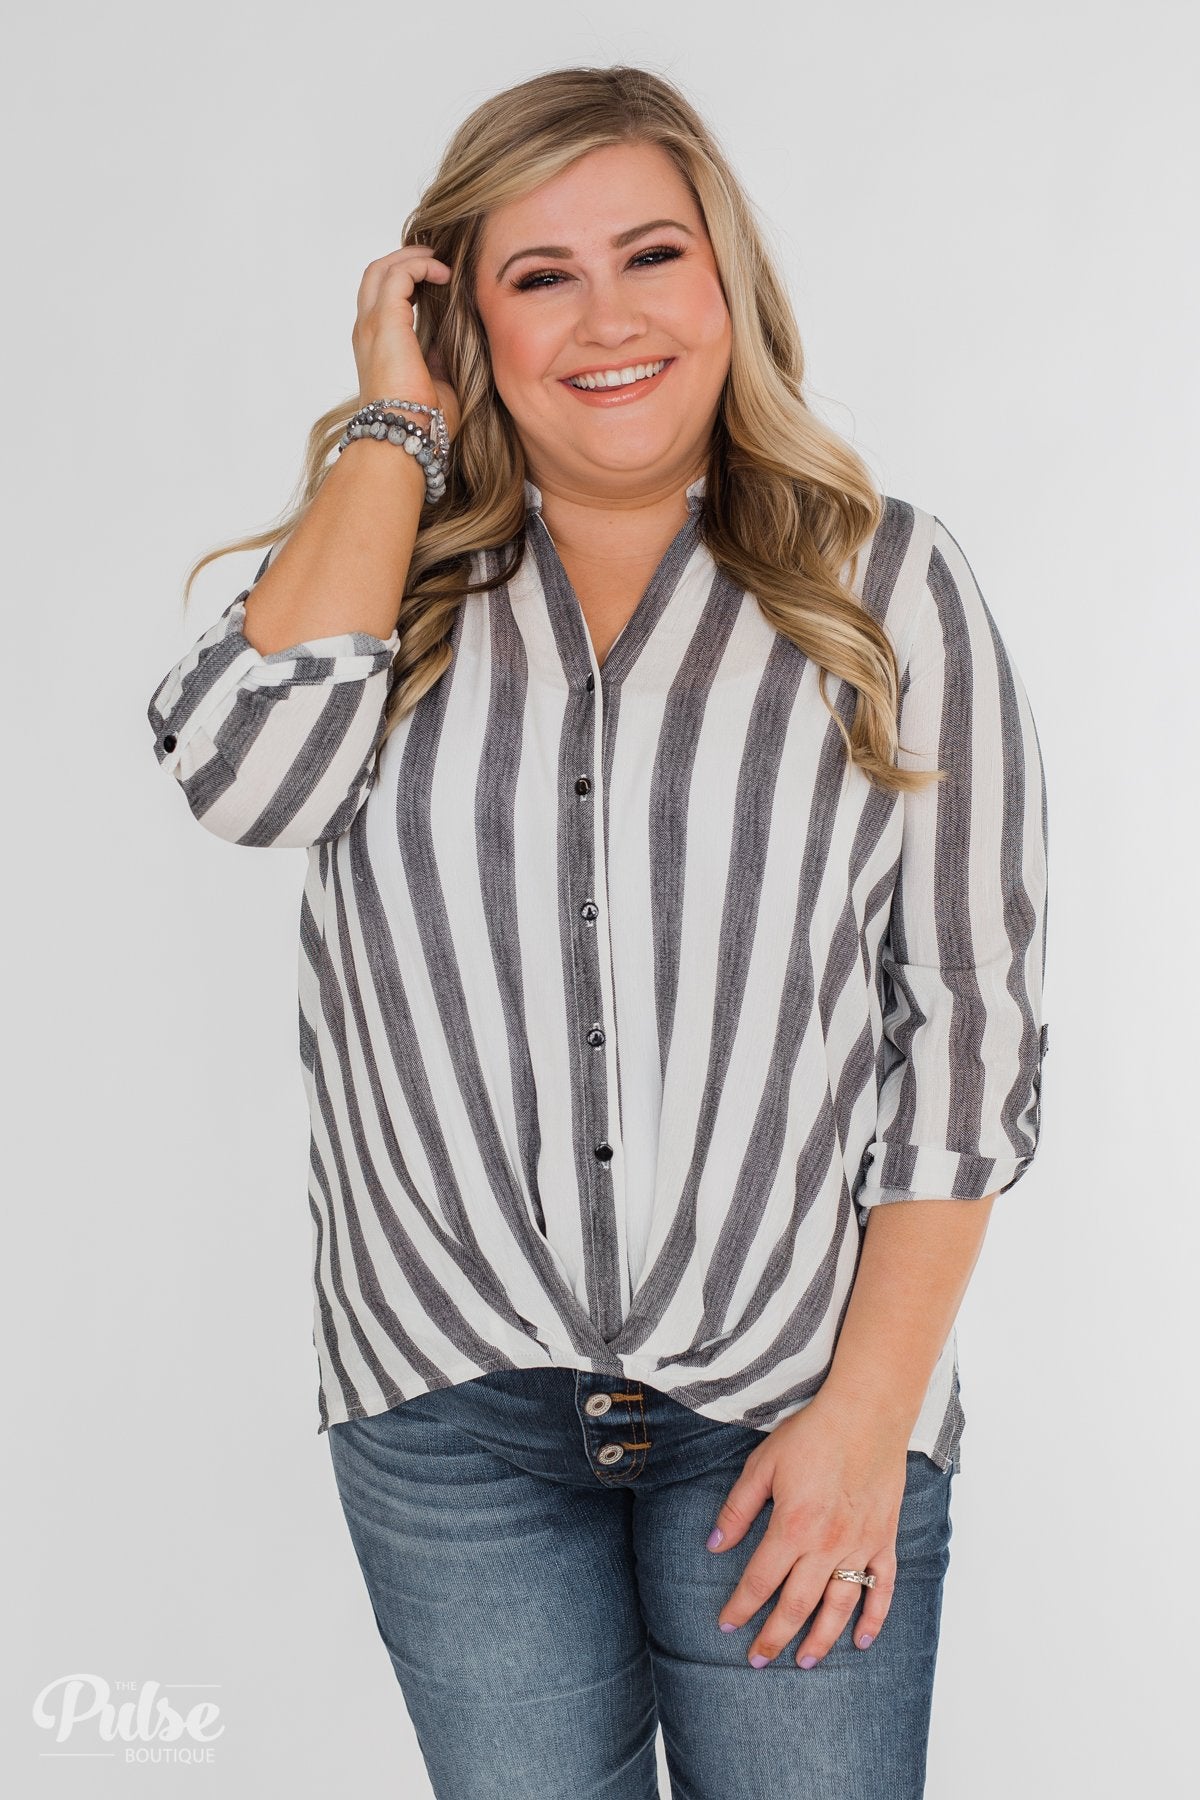 New Way Of Thinking Striped Blouse- Grey & White